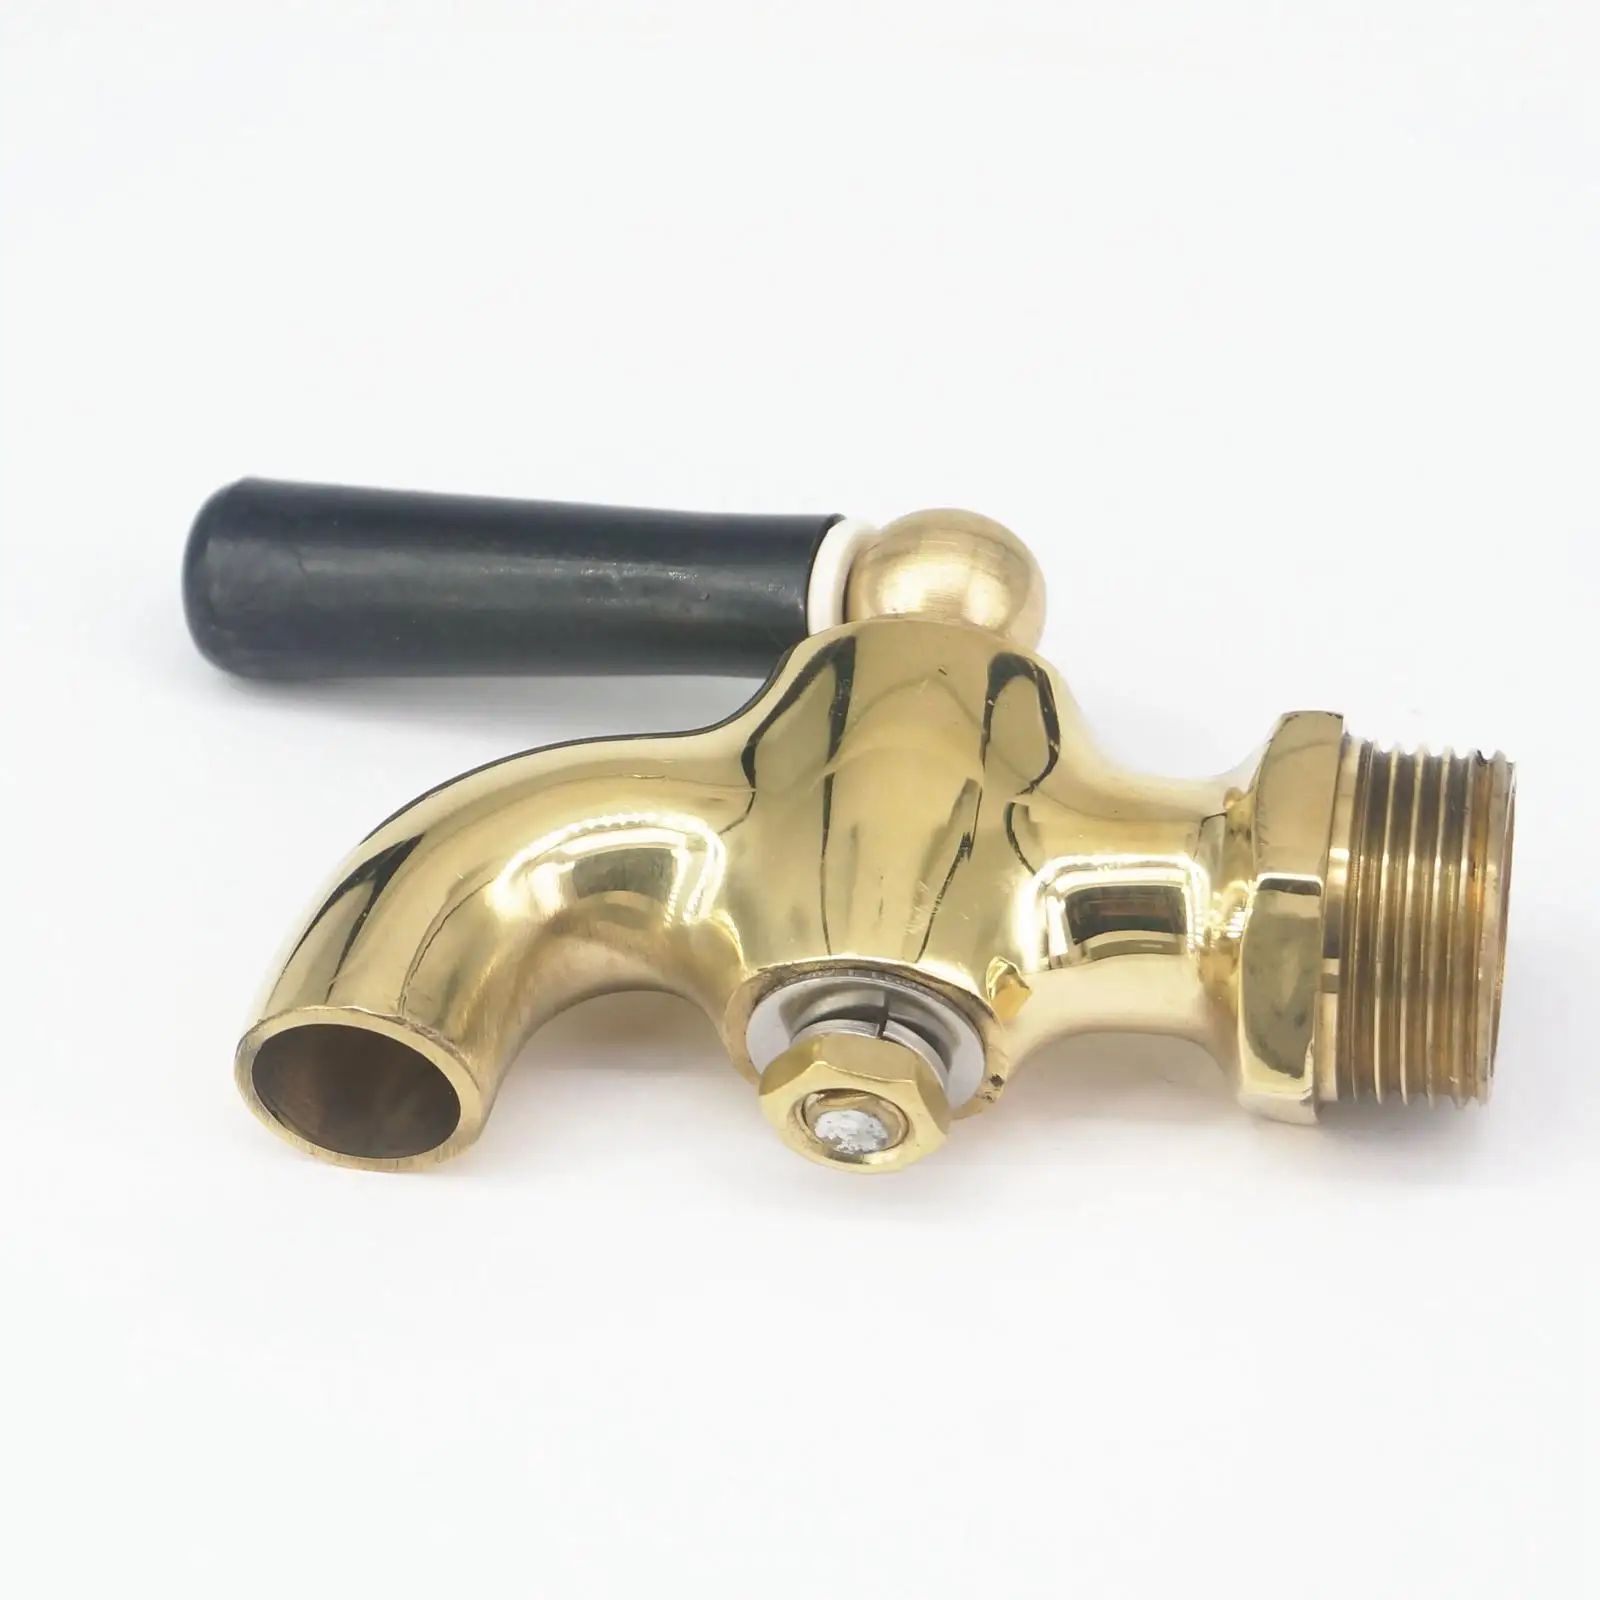 qfkj Valves 1pc Copper Plumbing Valve Wall Outlet Male G1/2 Black Faucets Shower Brass Angle Valve Bath Bathroom Accessories Piping Specification : DN15, Thread Type : BSP